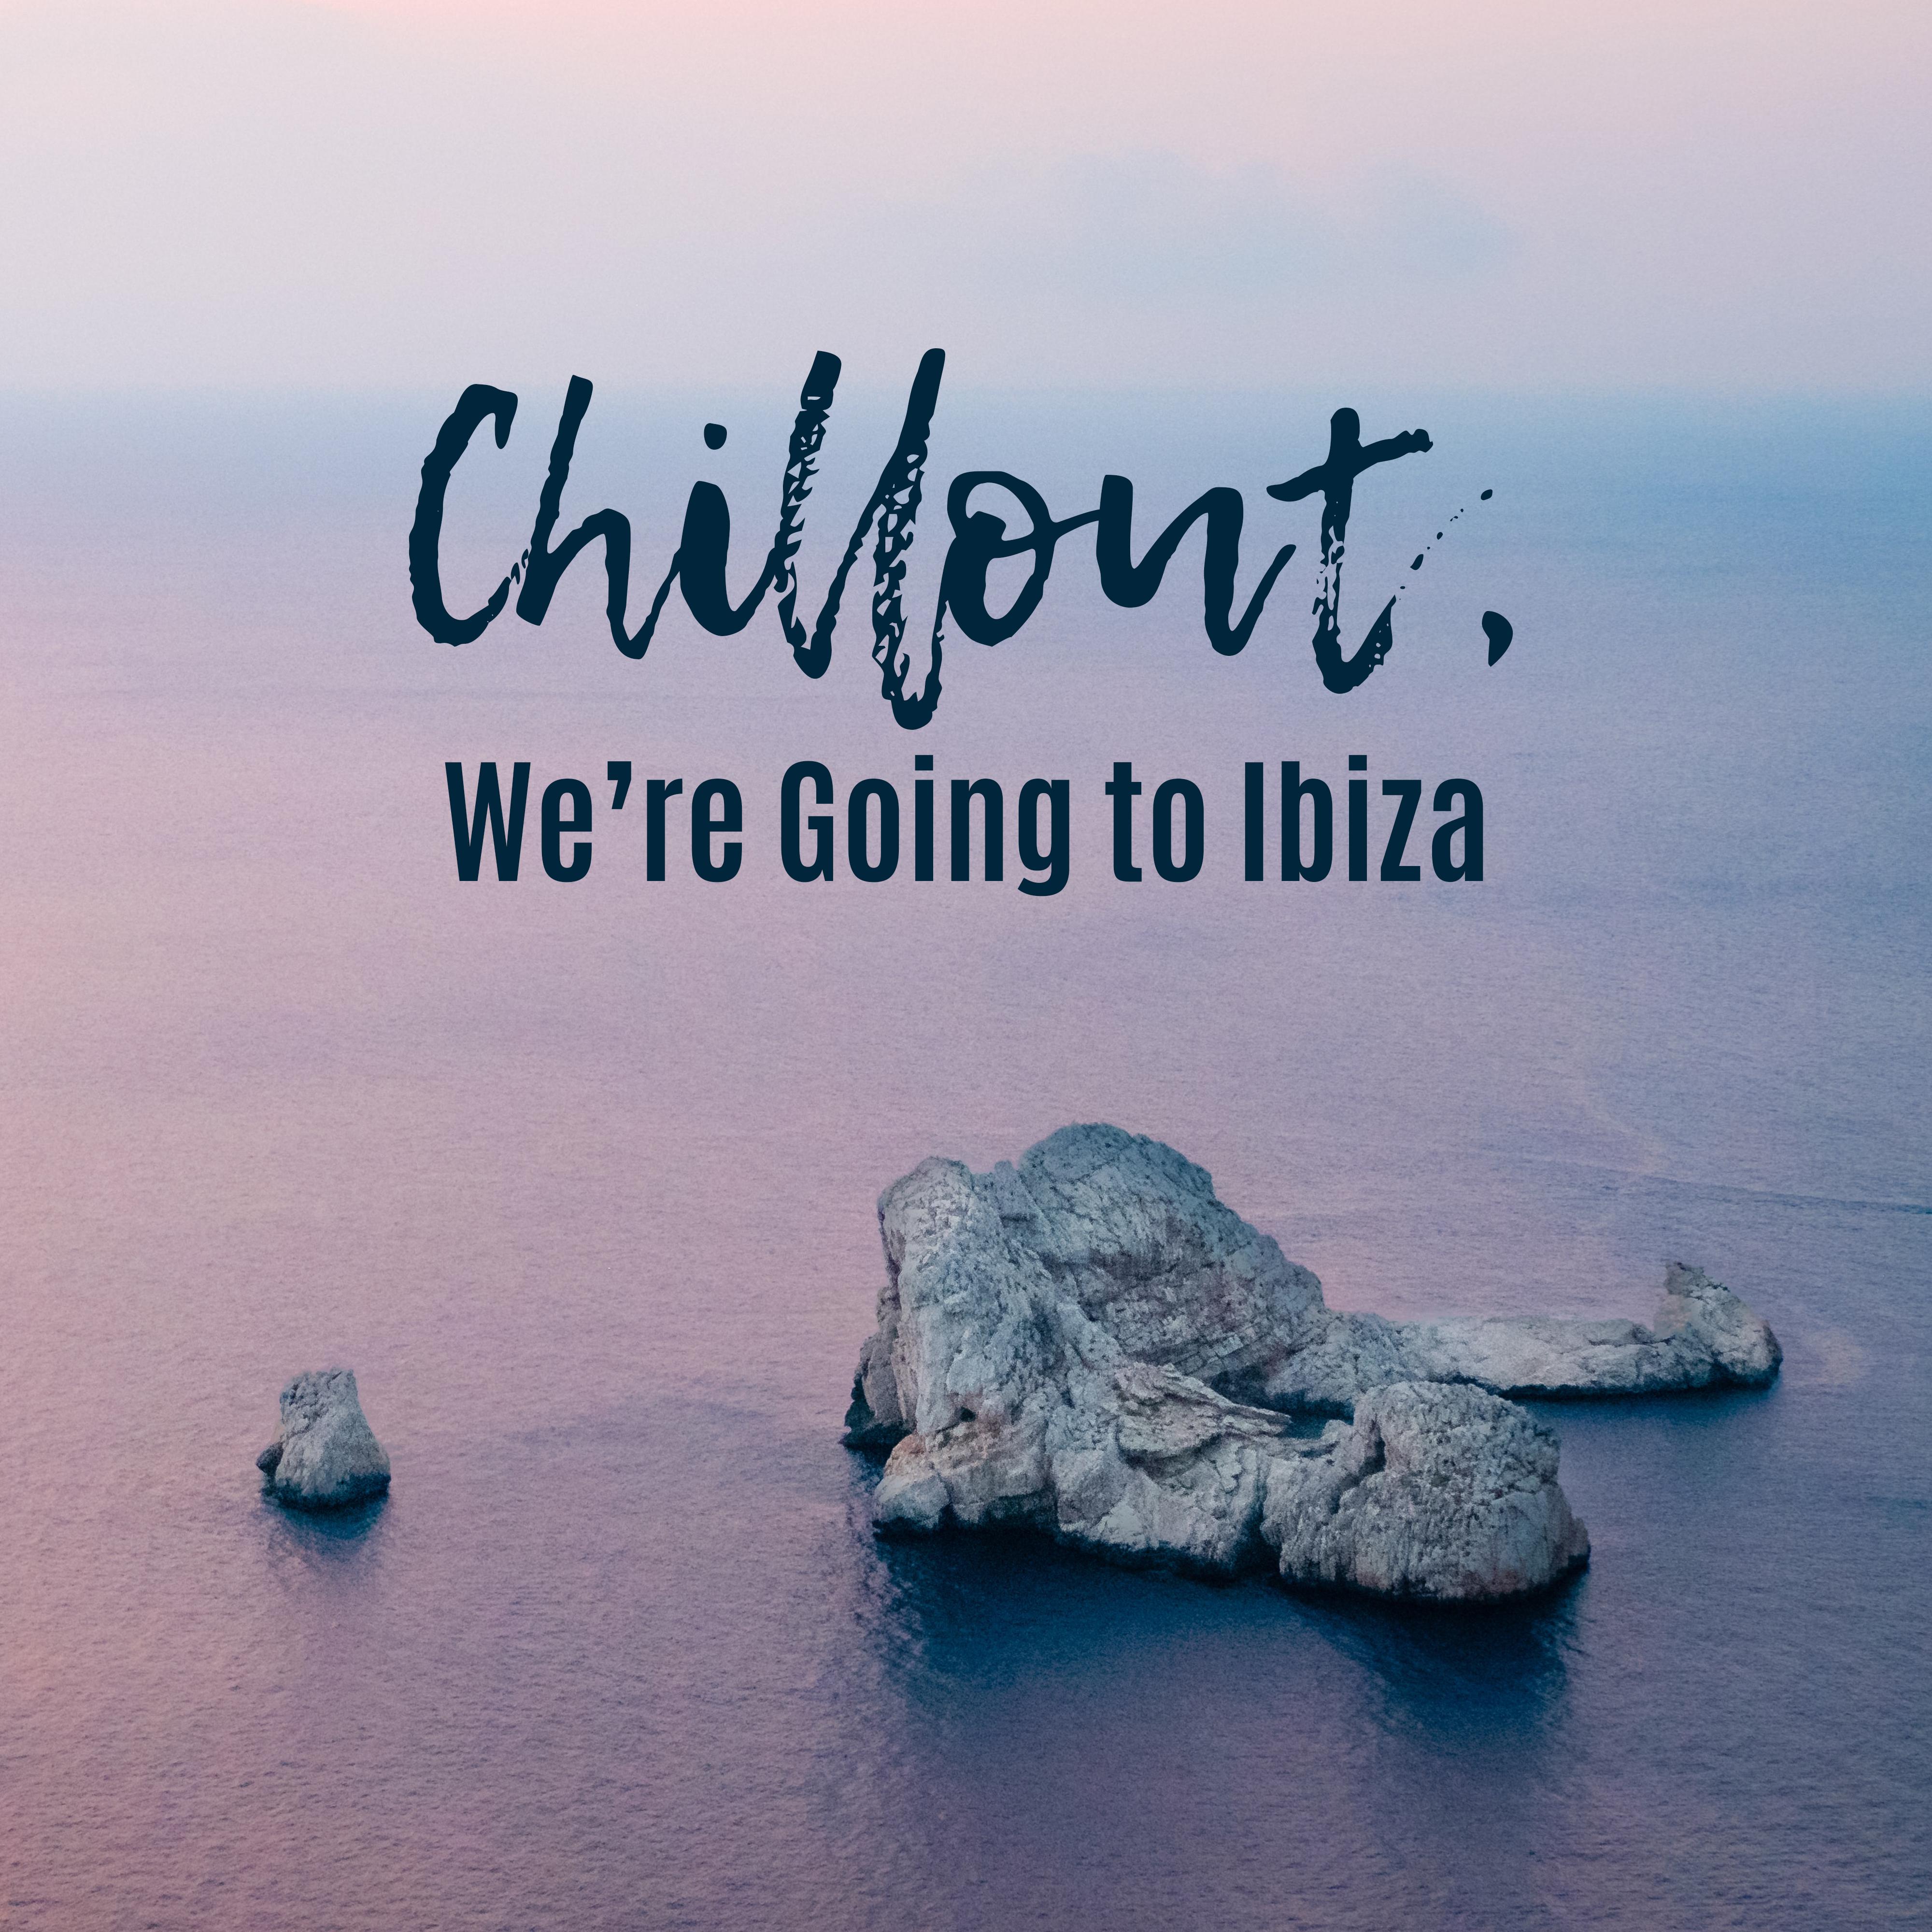 Chillout, We’re Going to Ibiza: 2019 Chill Out Vacation Mix, Music Perfect for Celebrating Summer Holiday in Ibiza, Total Relaxation on the Beach, Sunbathing, Beach Drink Bar Songs